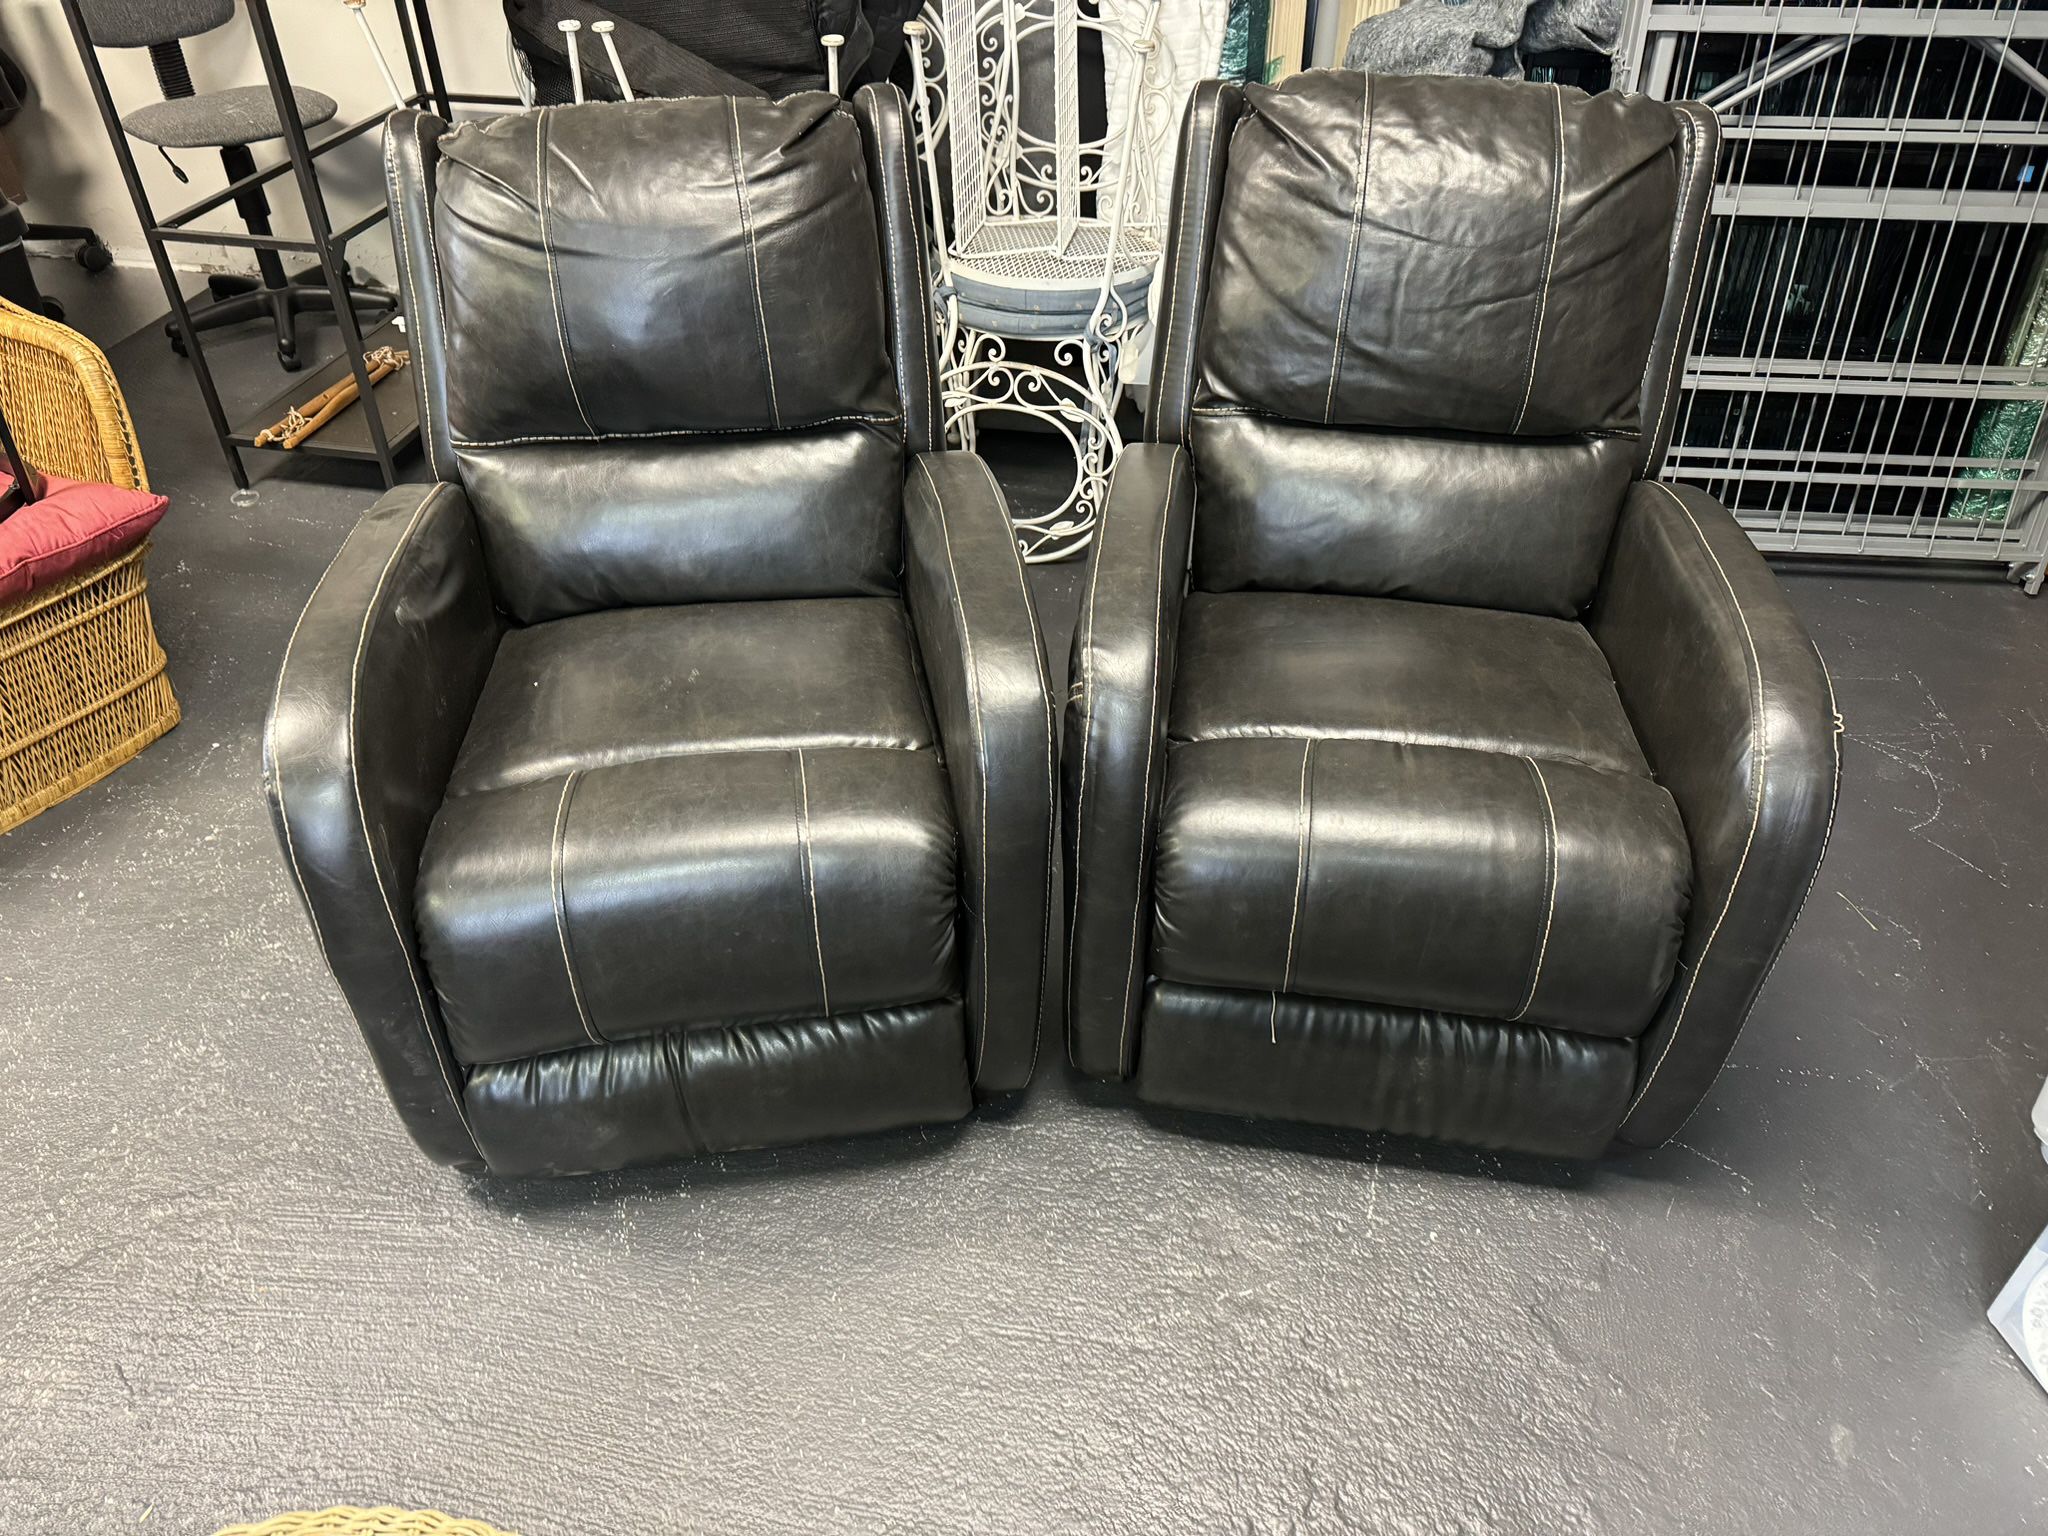 2 Leather Recliners 